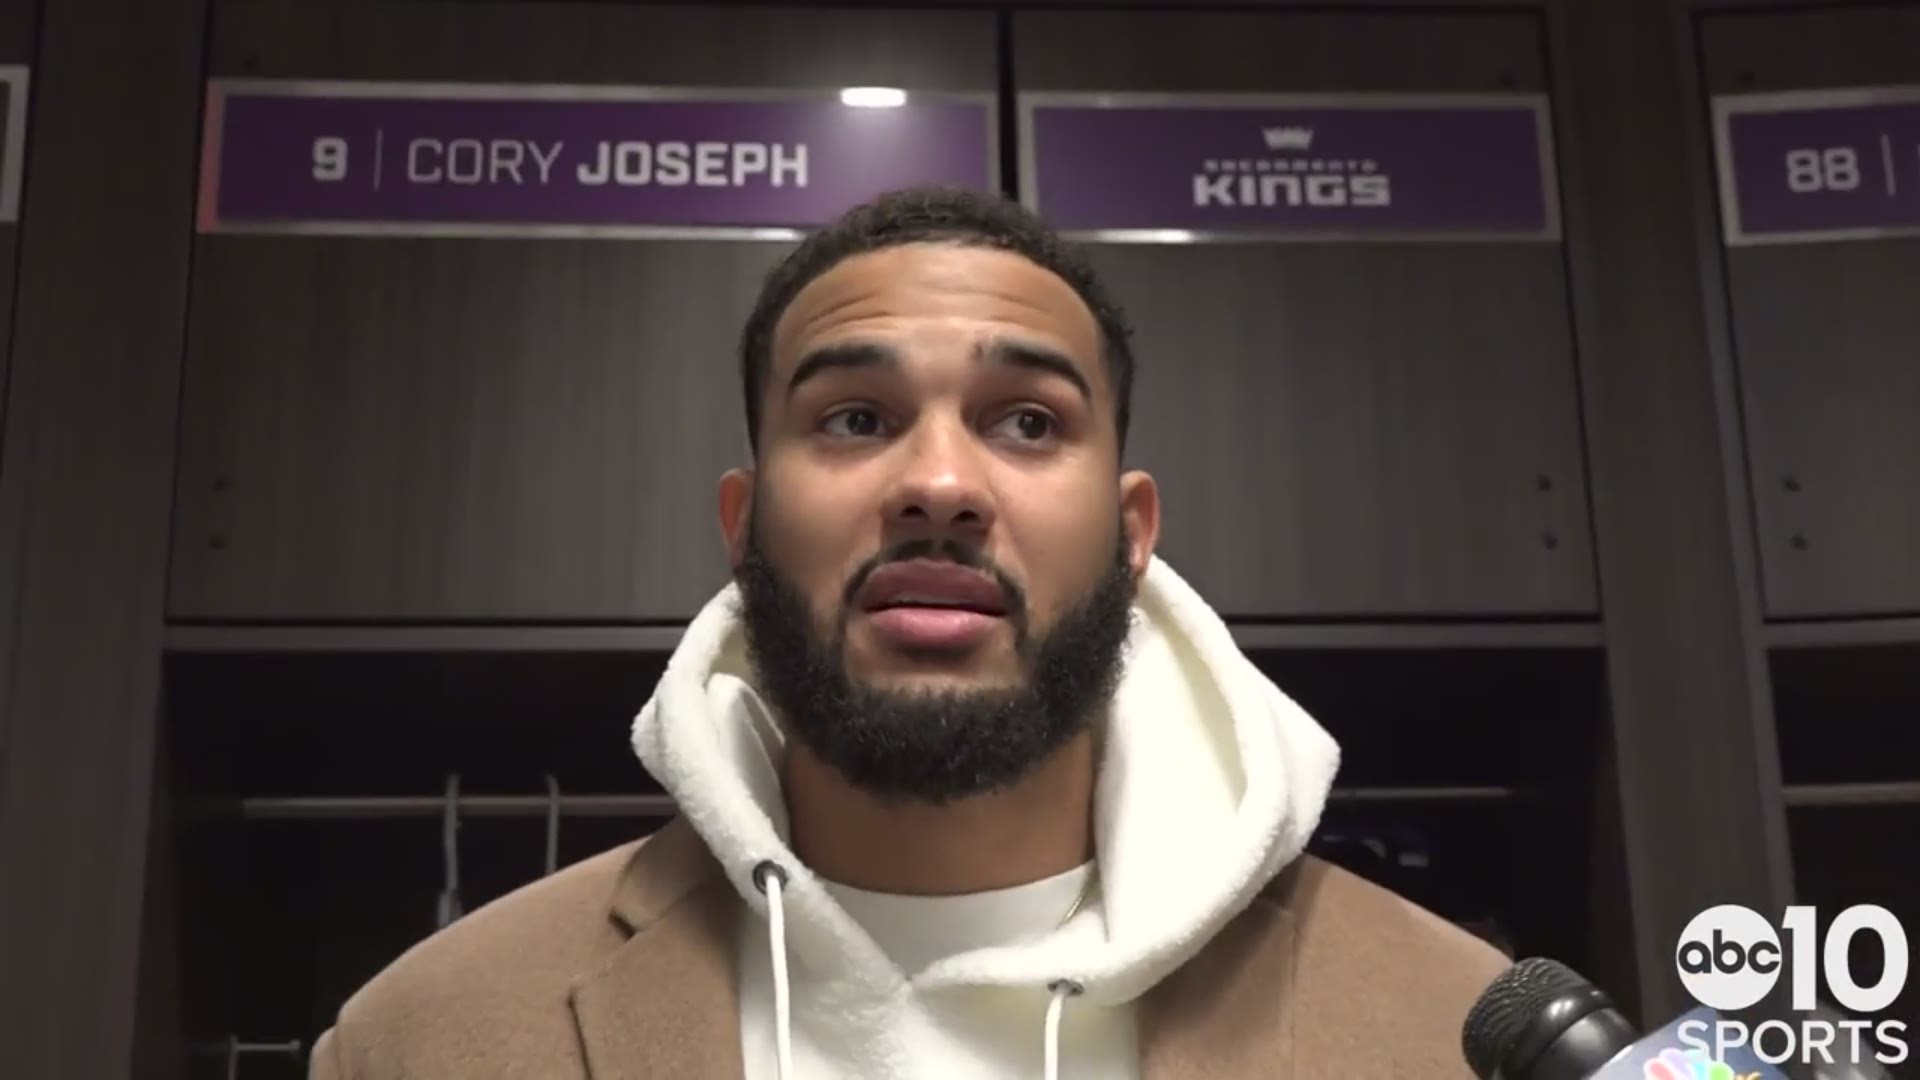 Kings PG Cory Joseph discusses Friday’s 103-101 loss to the New York Knicks and says his Sacramento team got too comfortable with its 16-point lead.